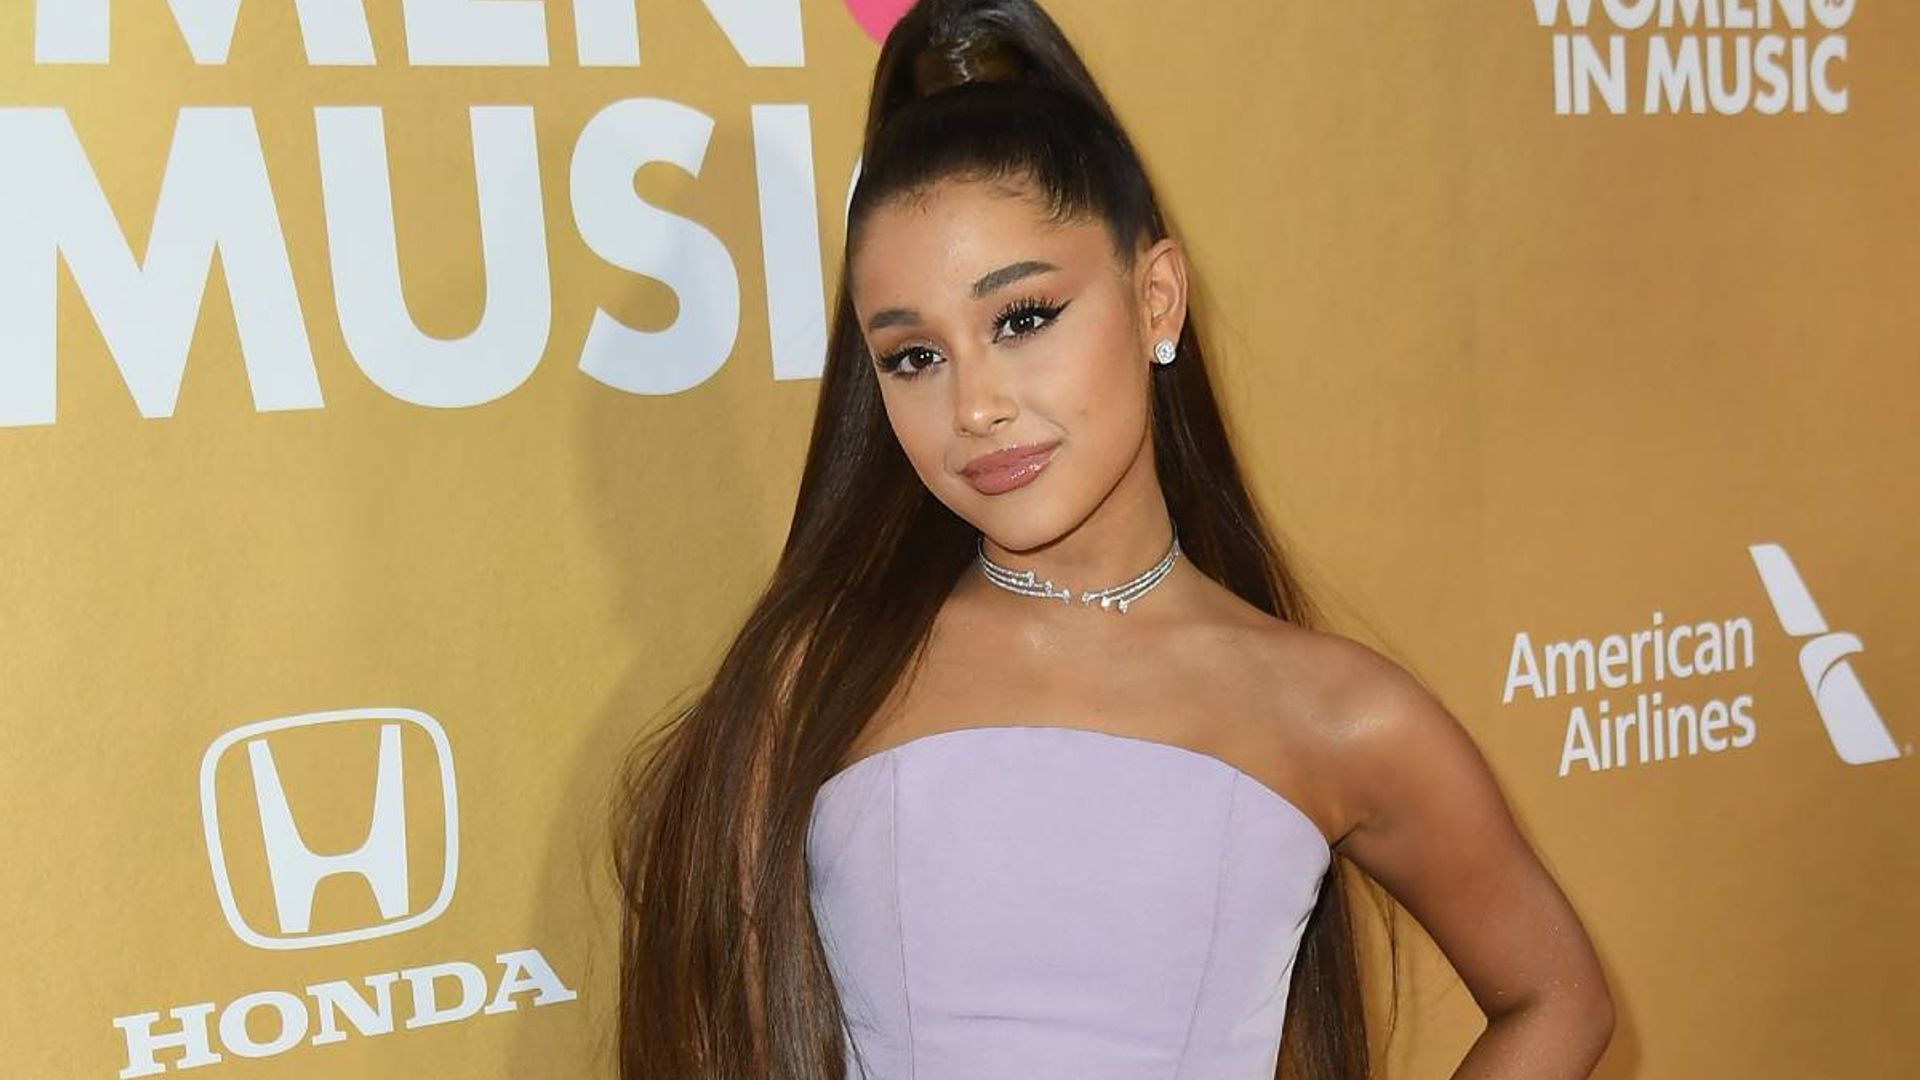 Ariana Grande causes a stir with an unexpected glam look that has